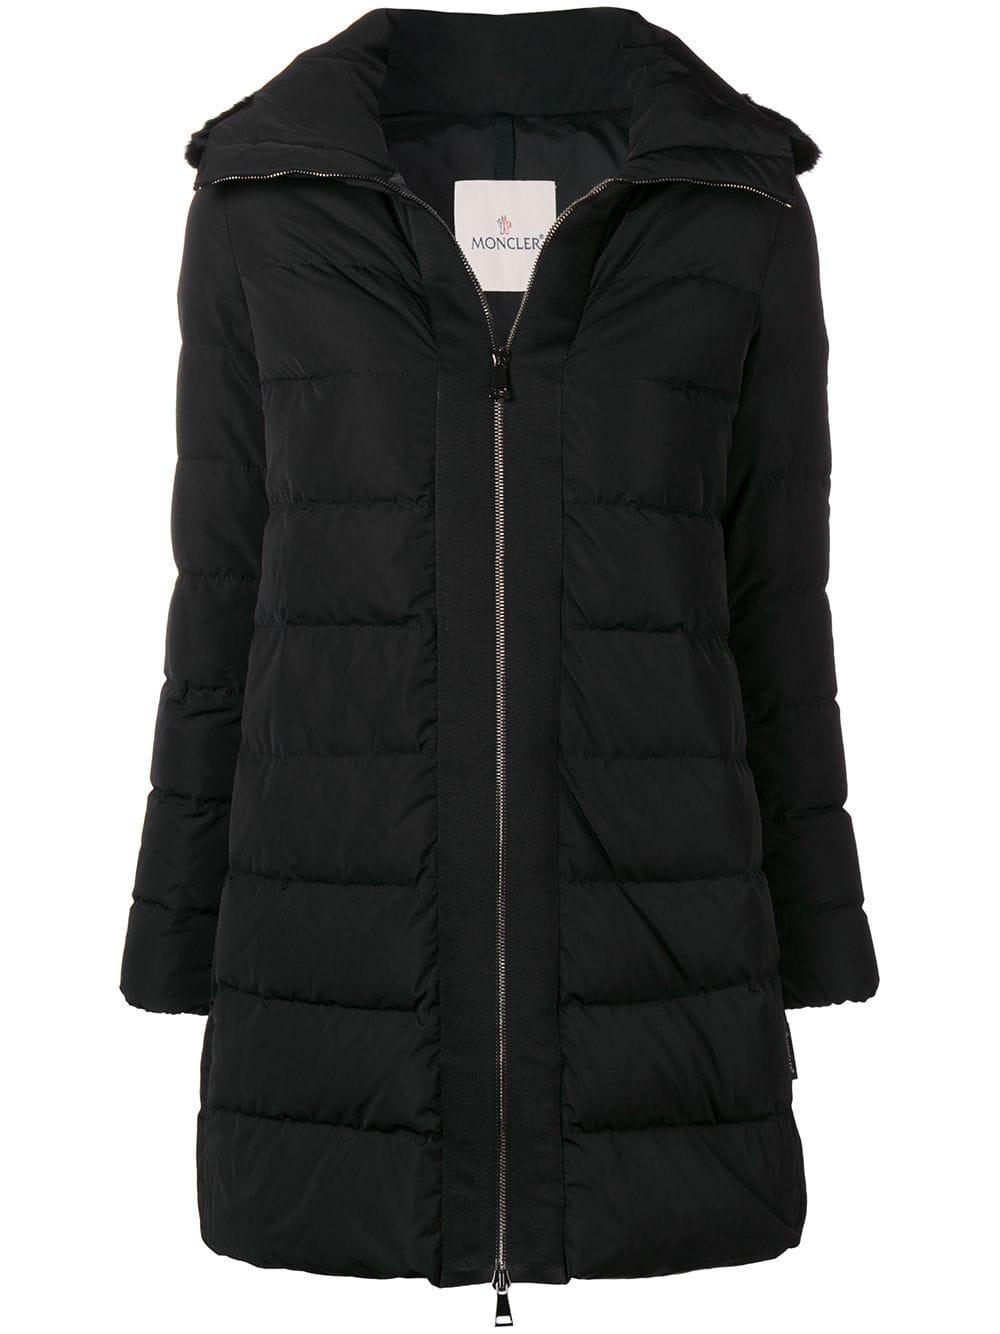 Moncler Synthetic Linotte Padded Coat in Black - Lyst